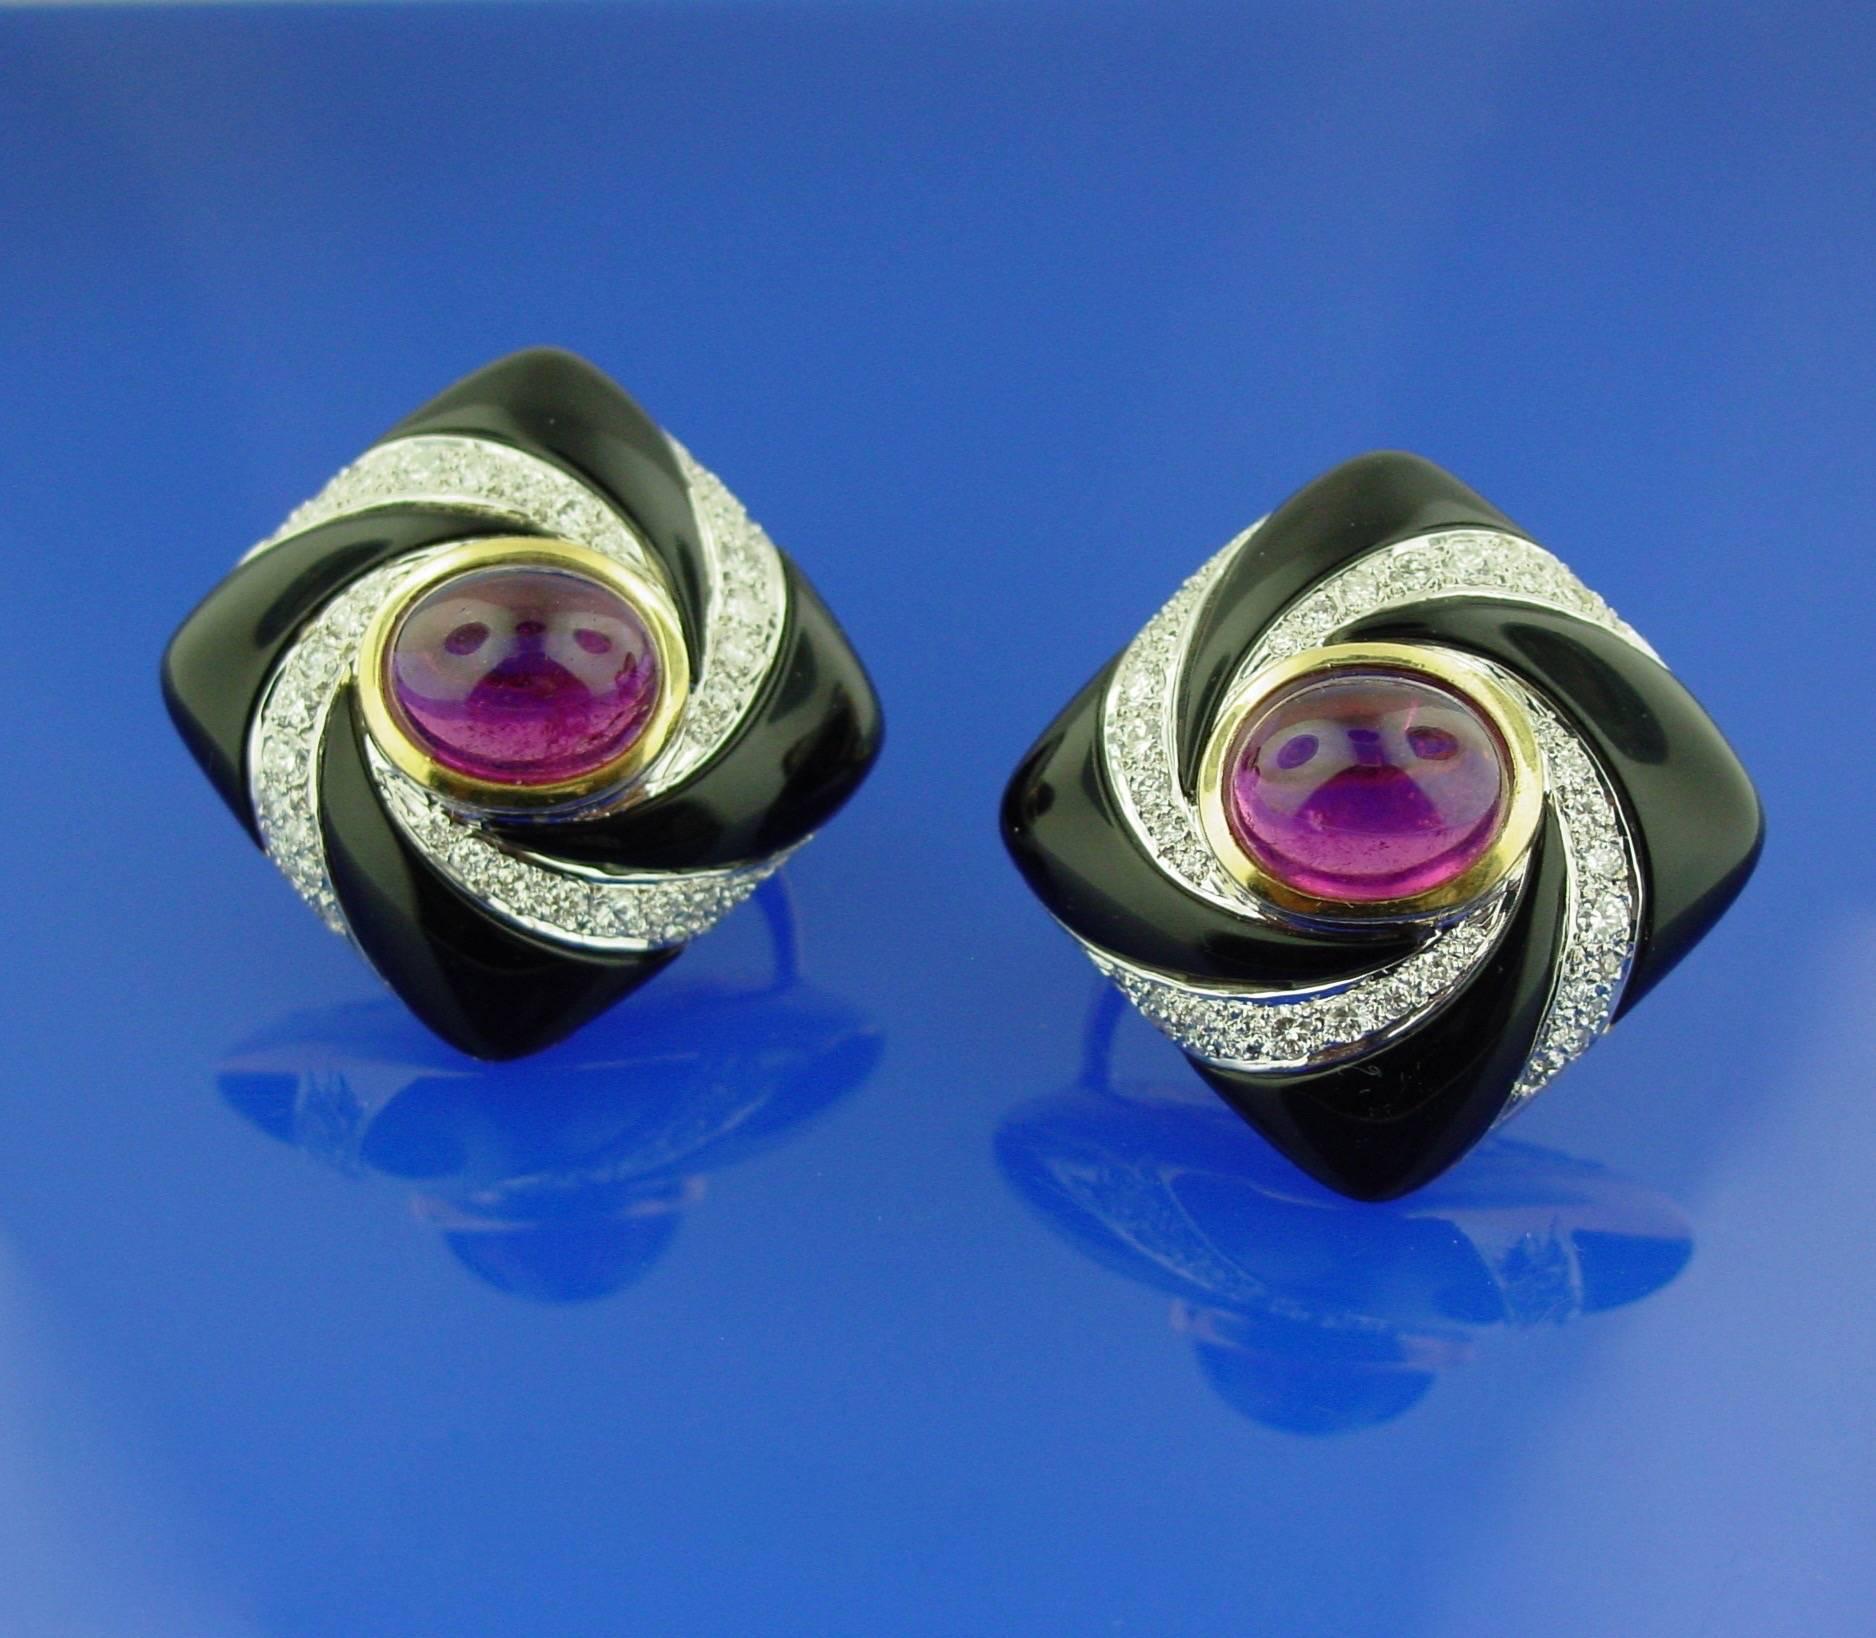 With a lovely pop of tailored color, these earrings feature two oval cabochon pink tourmalines set off by a swirl of diamonds and contrasting black onyx. Mounted in 18 karat yellow gold with post and clip backings.  Approximate diamond weight of 2